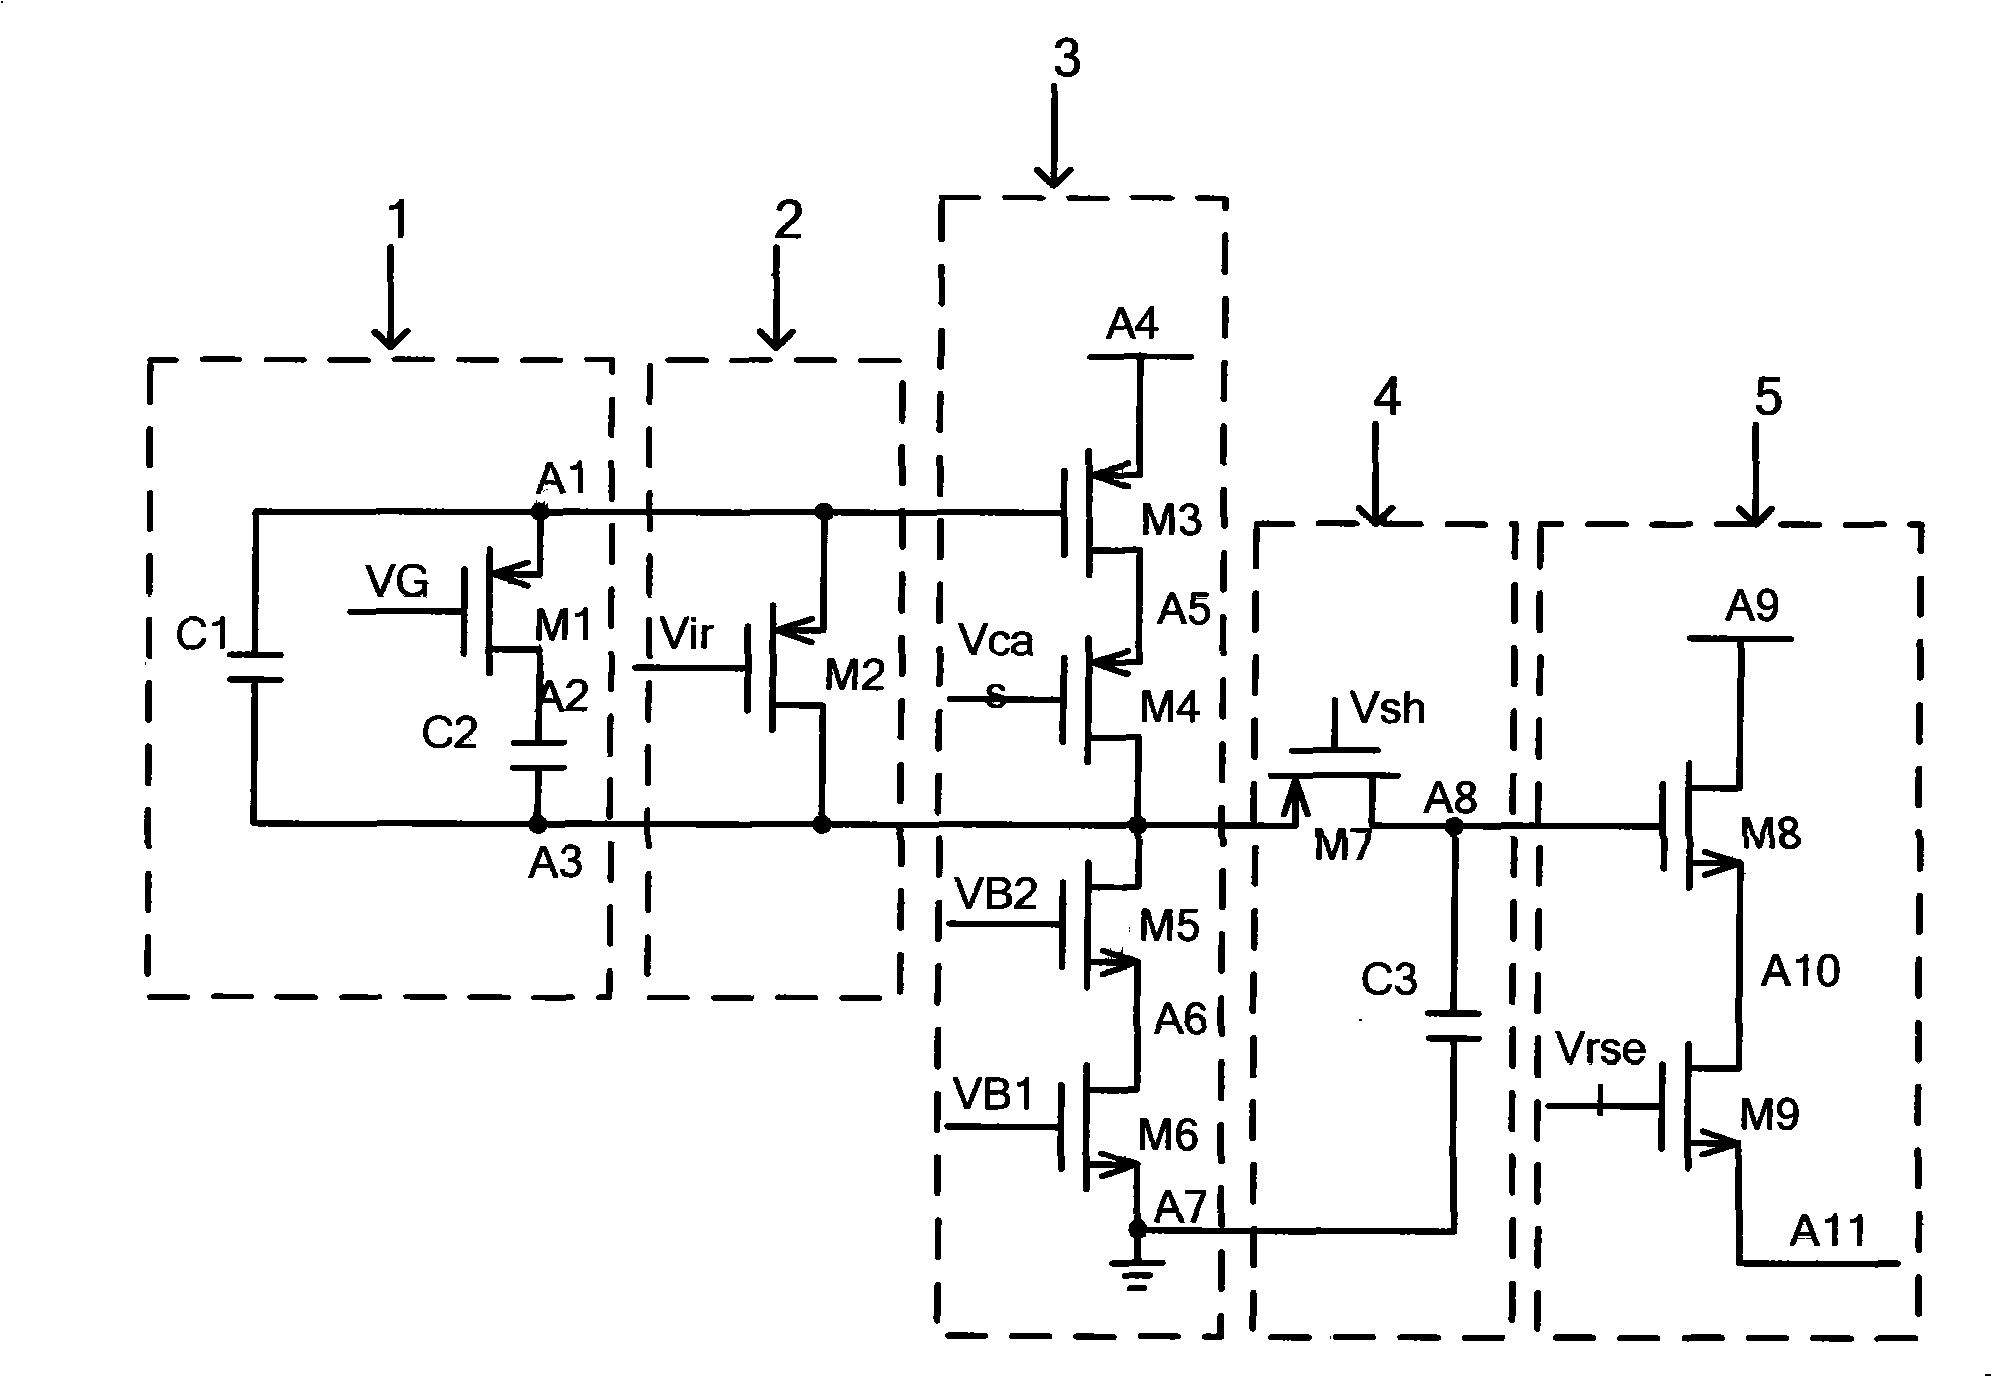 Infrared focal plane read-out circuit unit circuit